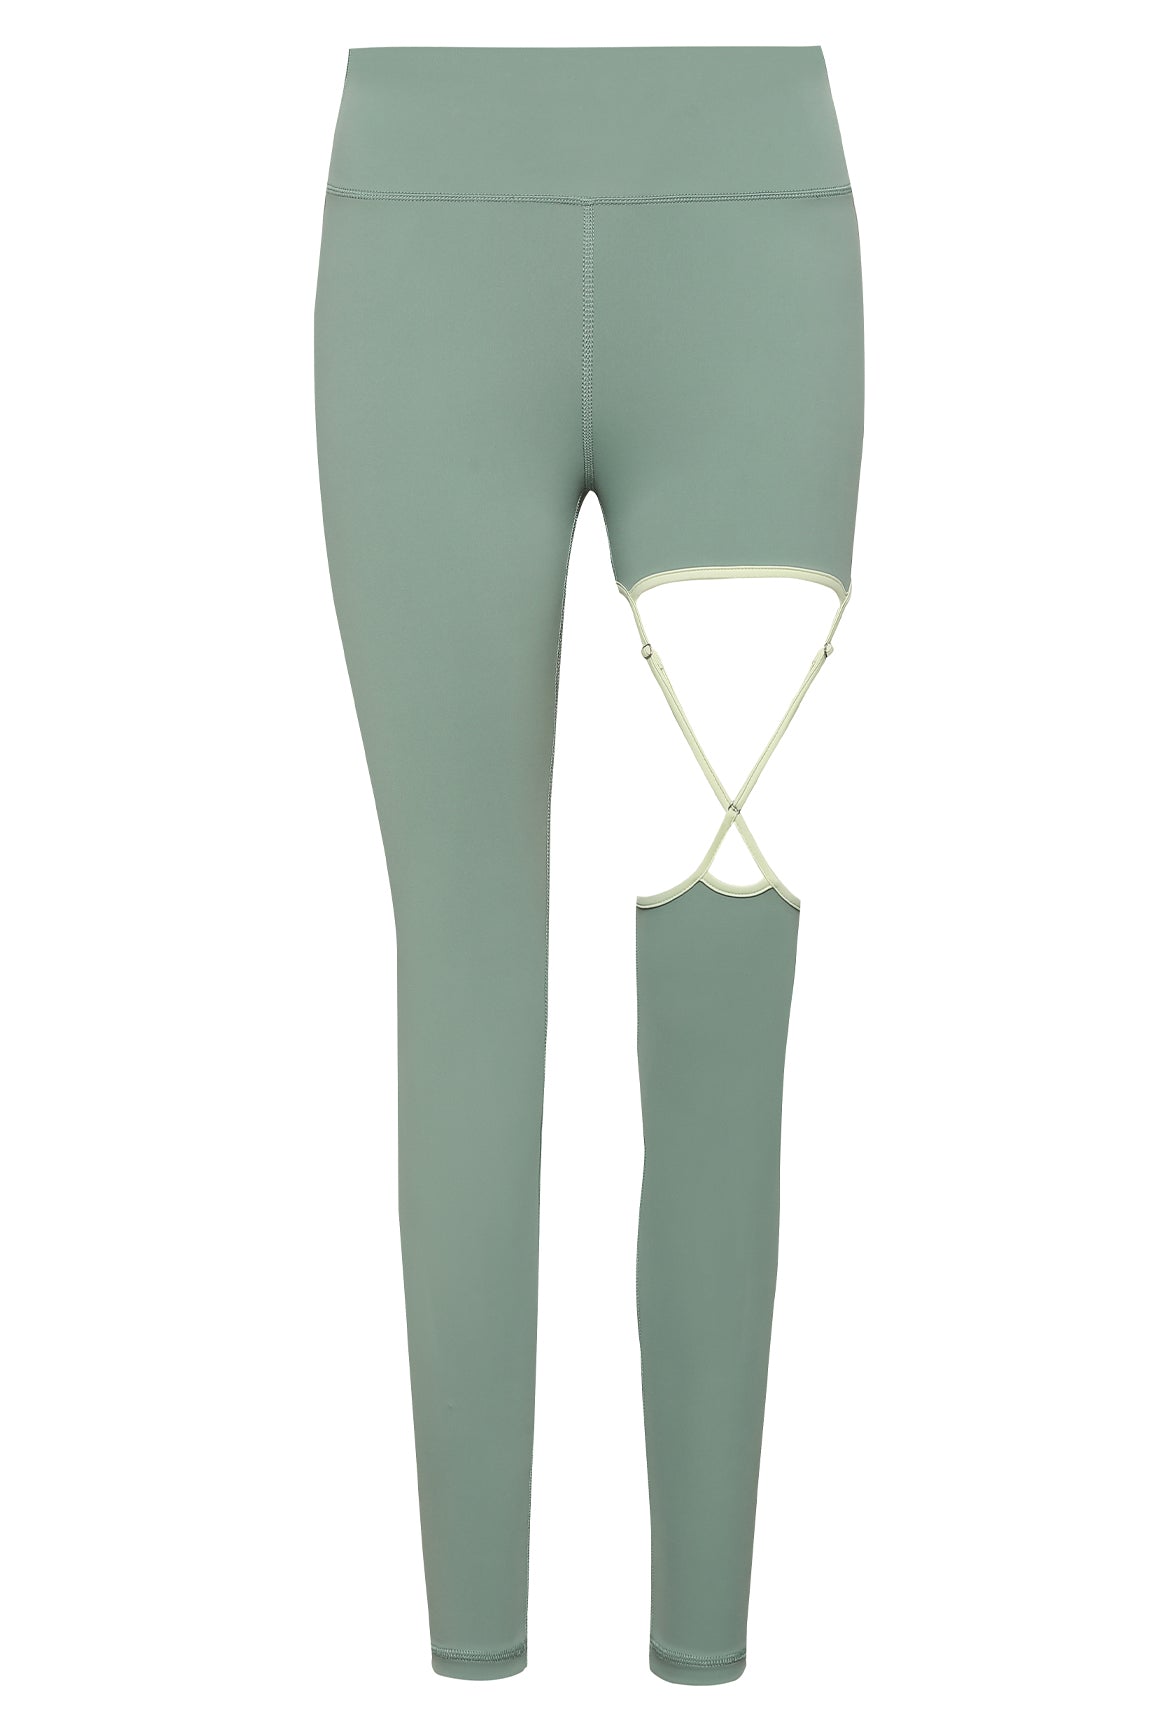 Teal Pu Plain Fitted Leggings, Unscripted